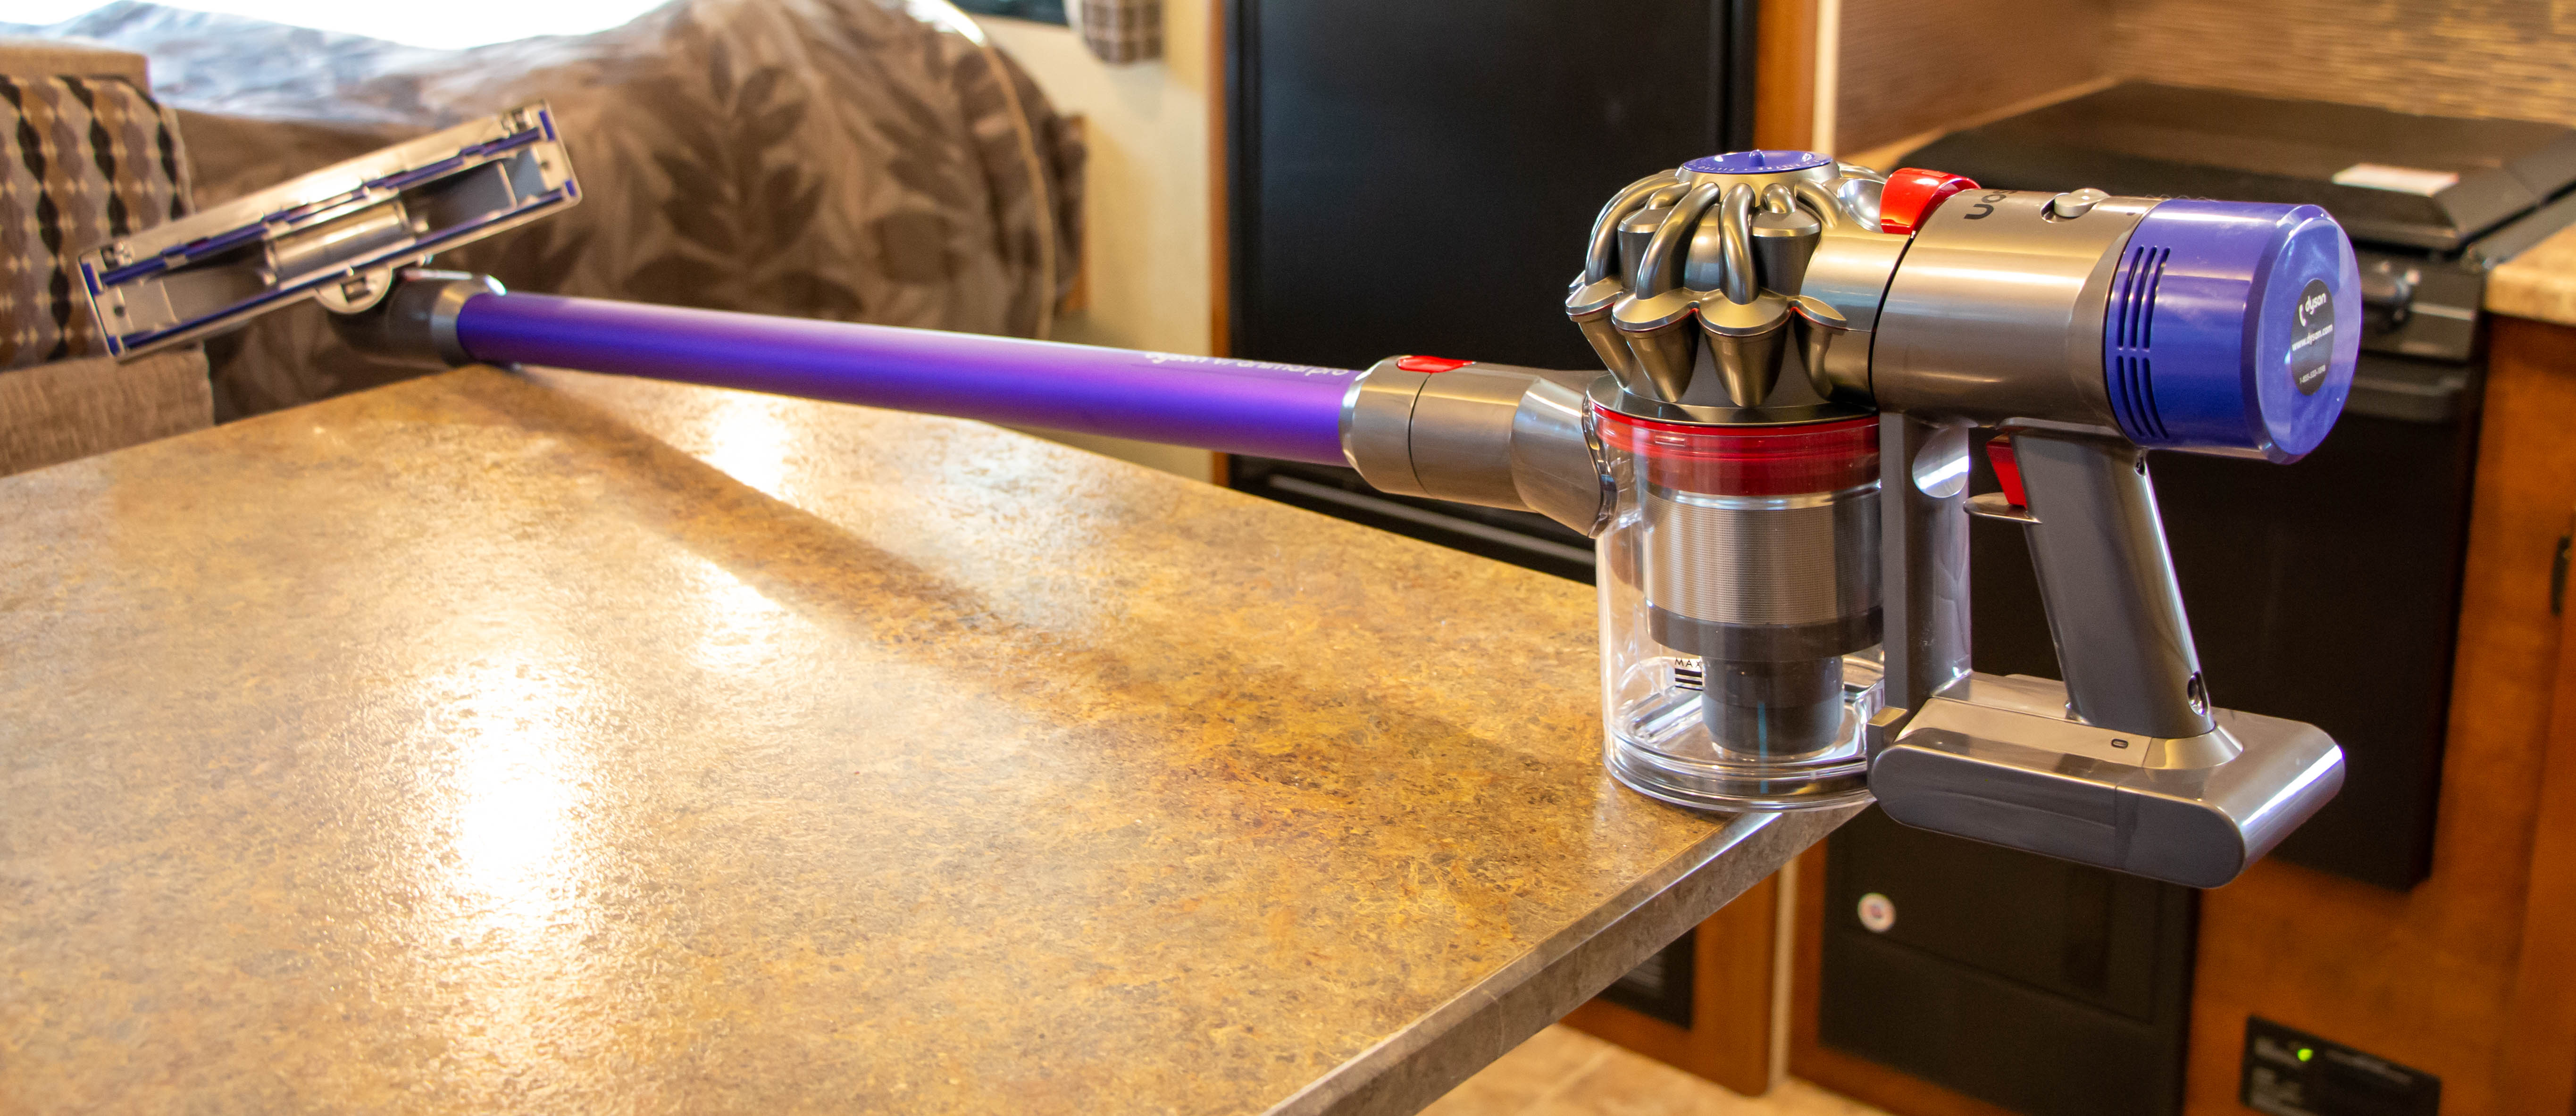 fonds viool markt Dyson V7 Animal Pro Vacuum - Tech Review | Busted Wallet